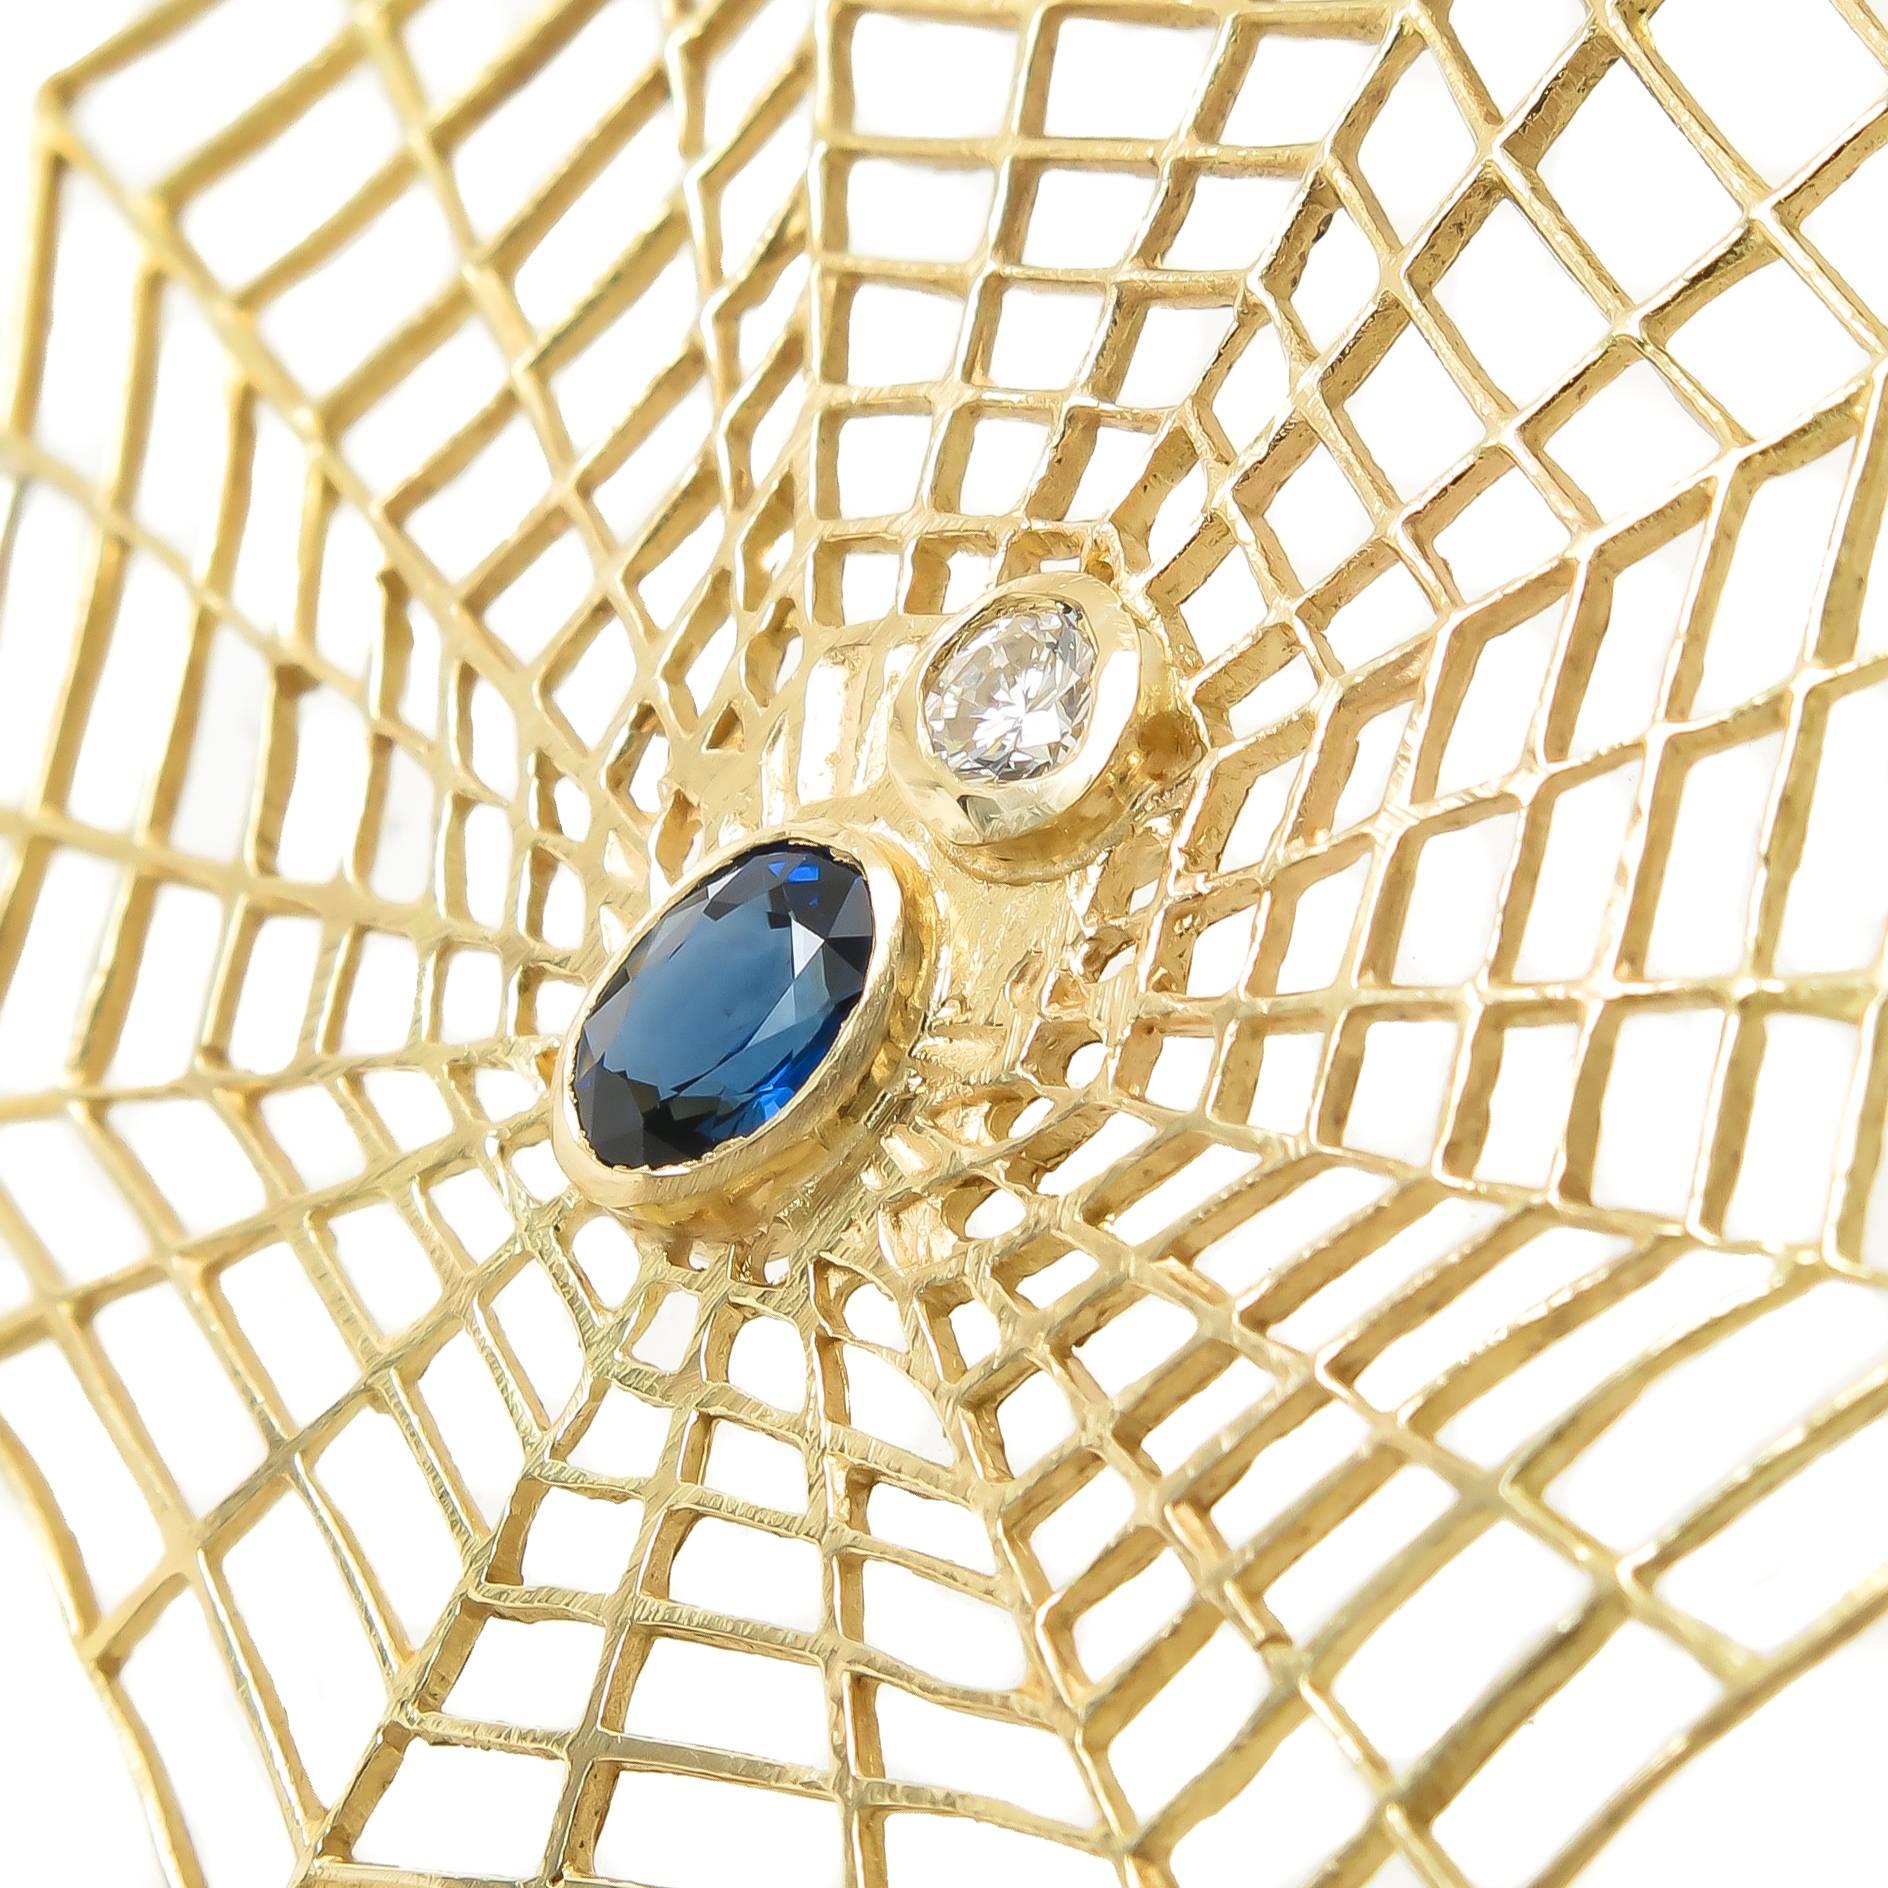 Circa 1980 large and fun 18K yellow Gold Spider Web earrings, measuring 2 3/8 inch in length and 1 7/8 inch in diameter. Set with very fine color Sapphires total 1 Carat and Round Brilliant cut Diamonds grading as H in Color and VS in clarity and